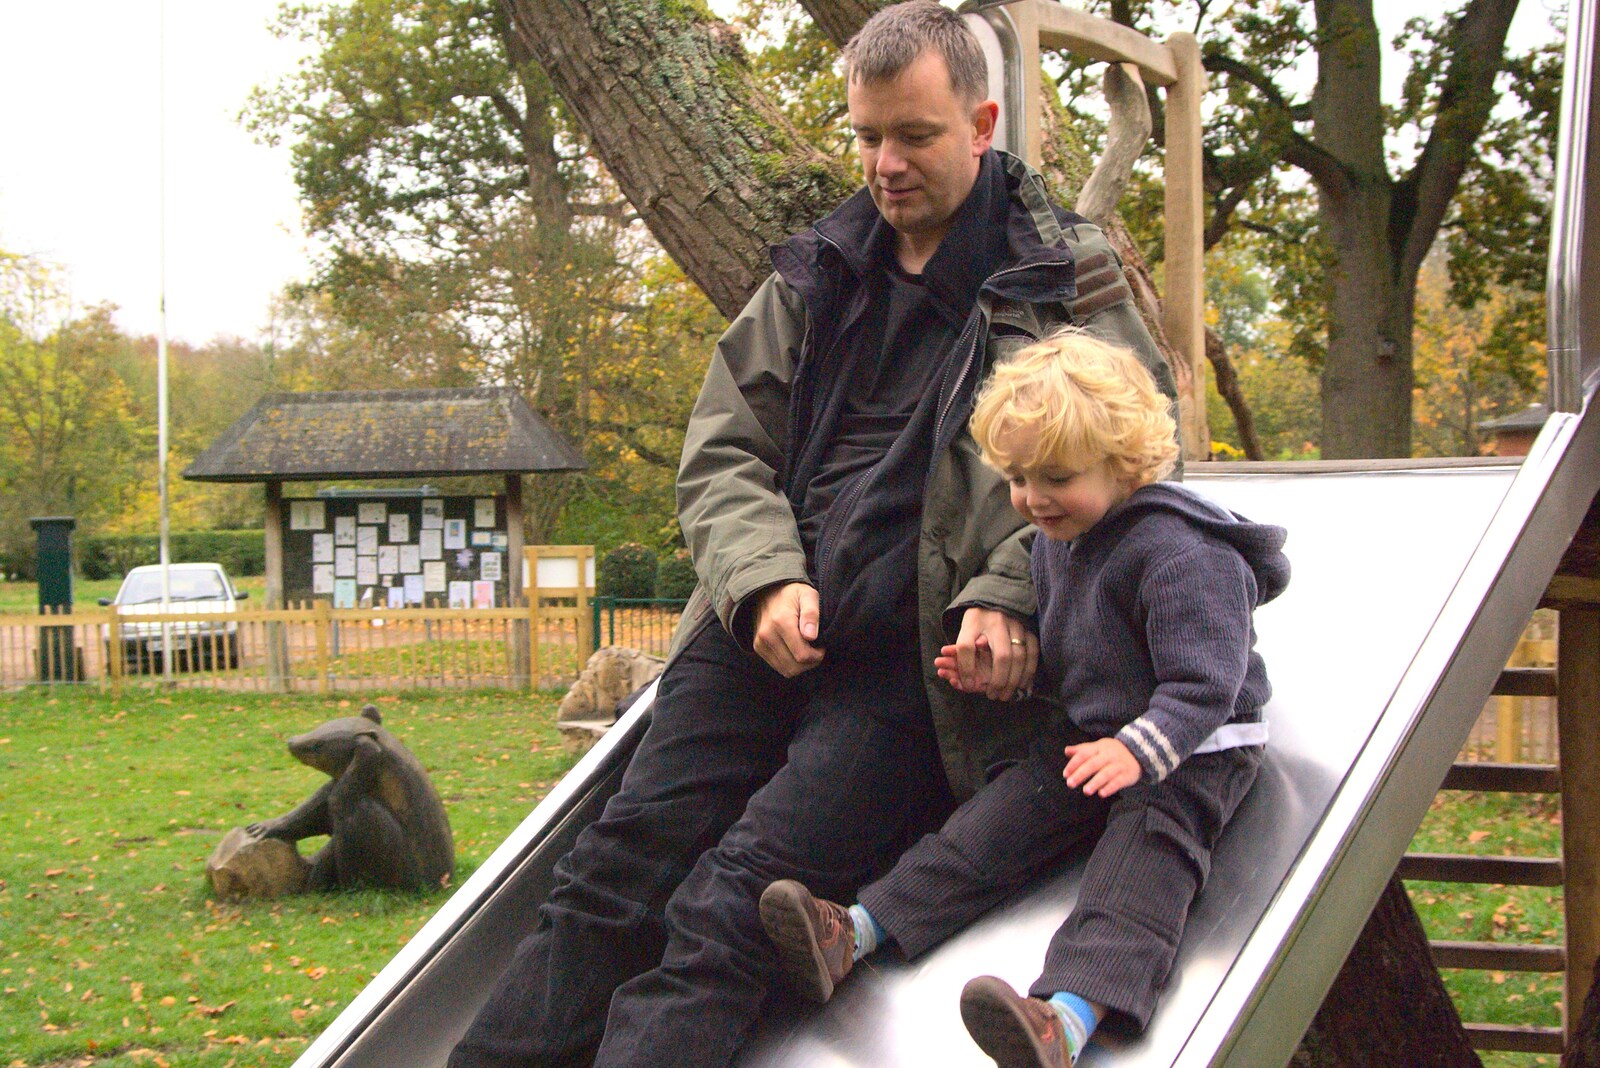 Nosher and Fred have a go on the slide from Autumn in Thornham Estate, Thornham, Suffolk - 6th November 2011